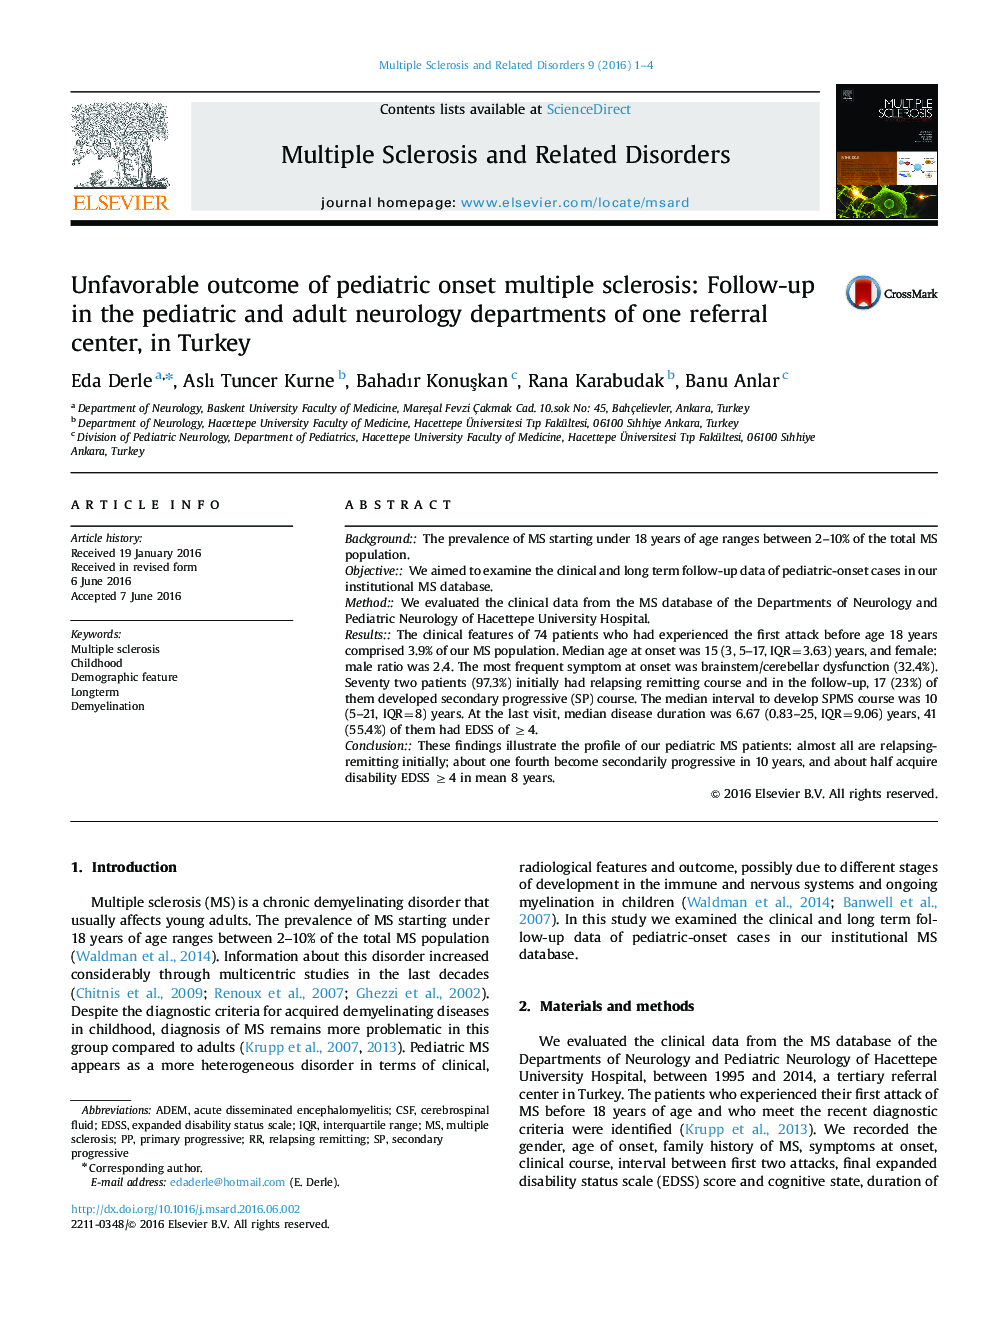 Unfavorable outcome of pediatric onset multiple sclerosis: Follow-up in the pediatric and adult neurology departments of one referral center, in Turkey